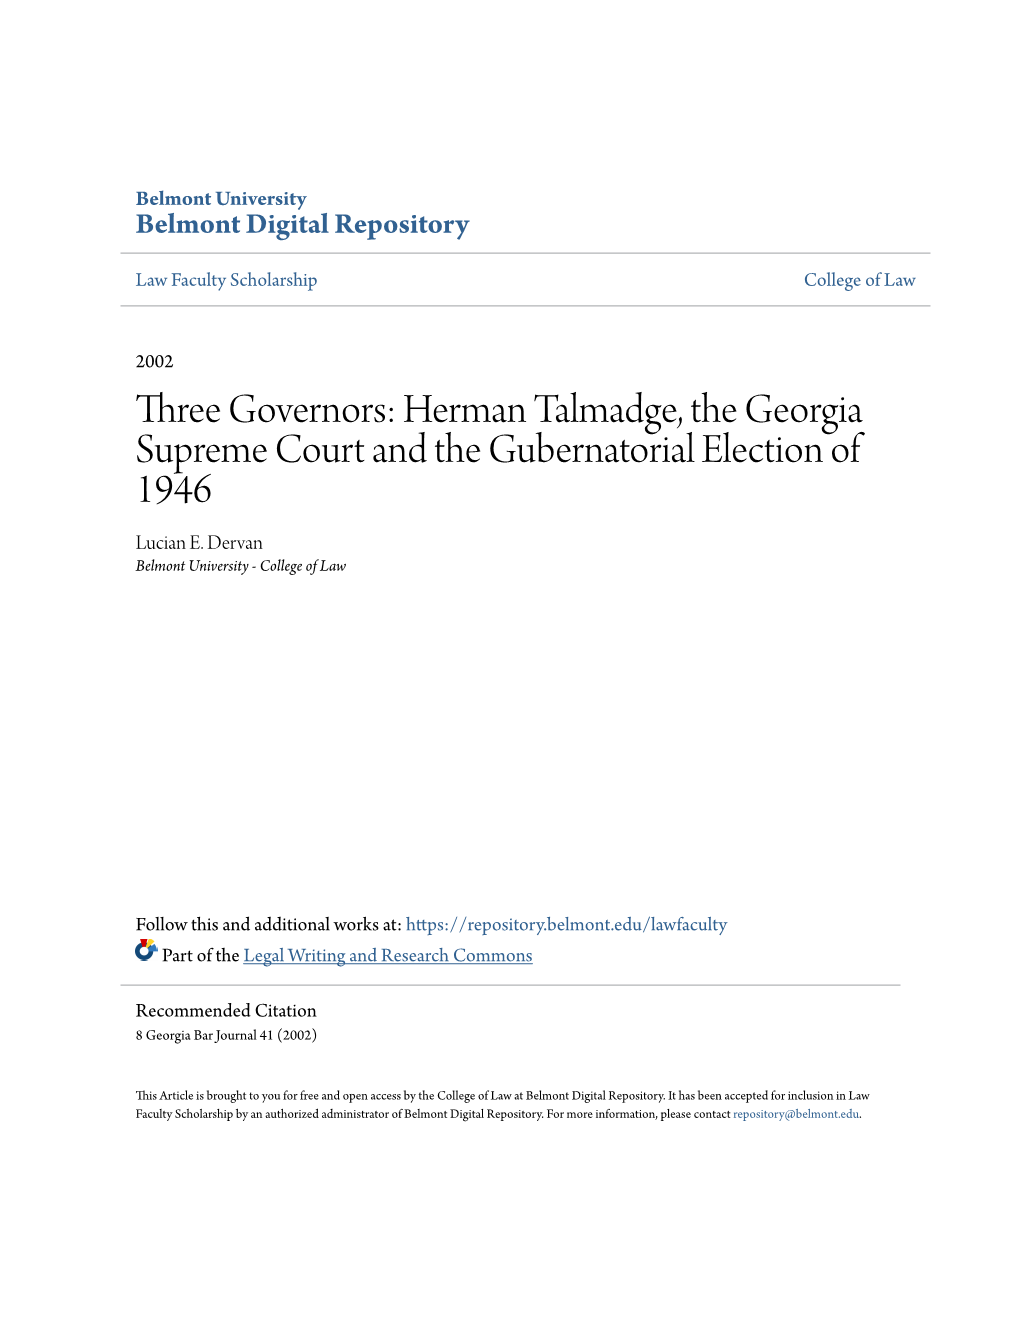 Three Governors: Herman Talmadge, the Georgia Supreme Court and the Gubernatorial Election of 1946 Lucian E